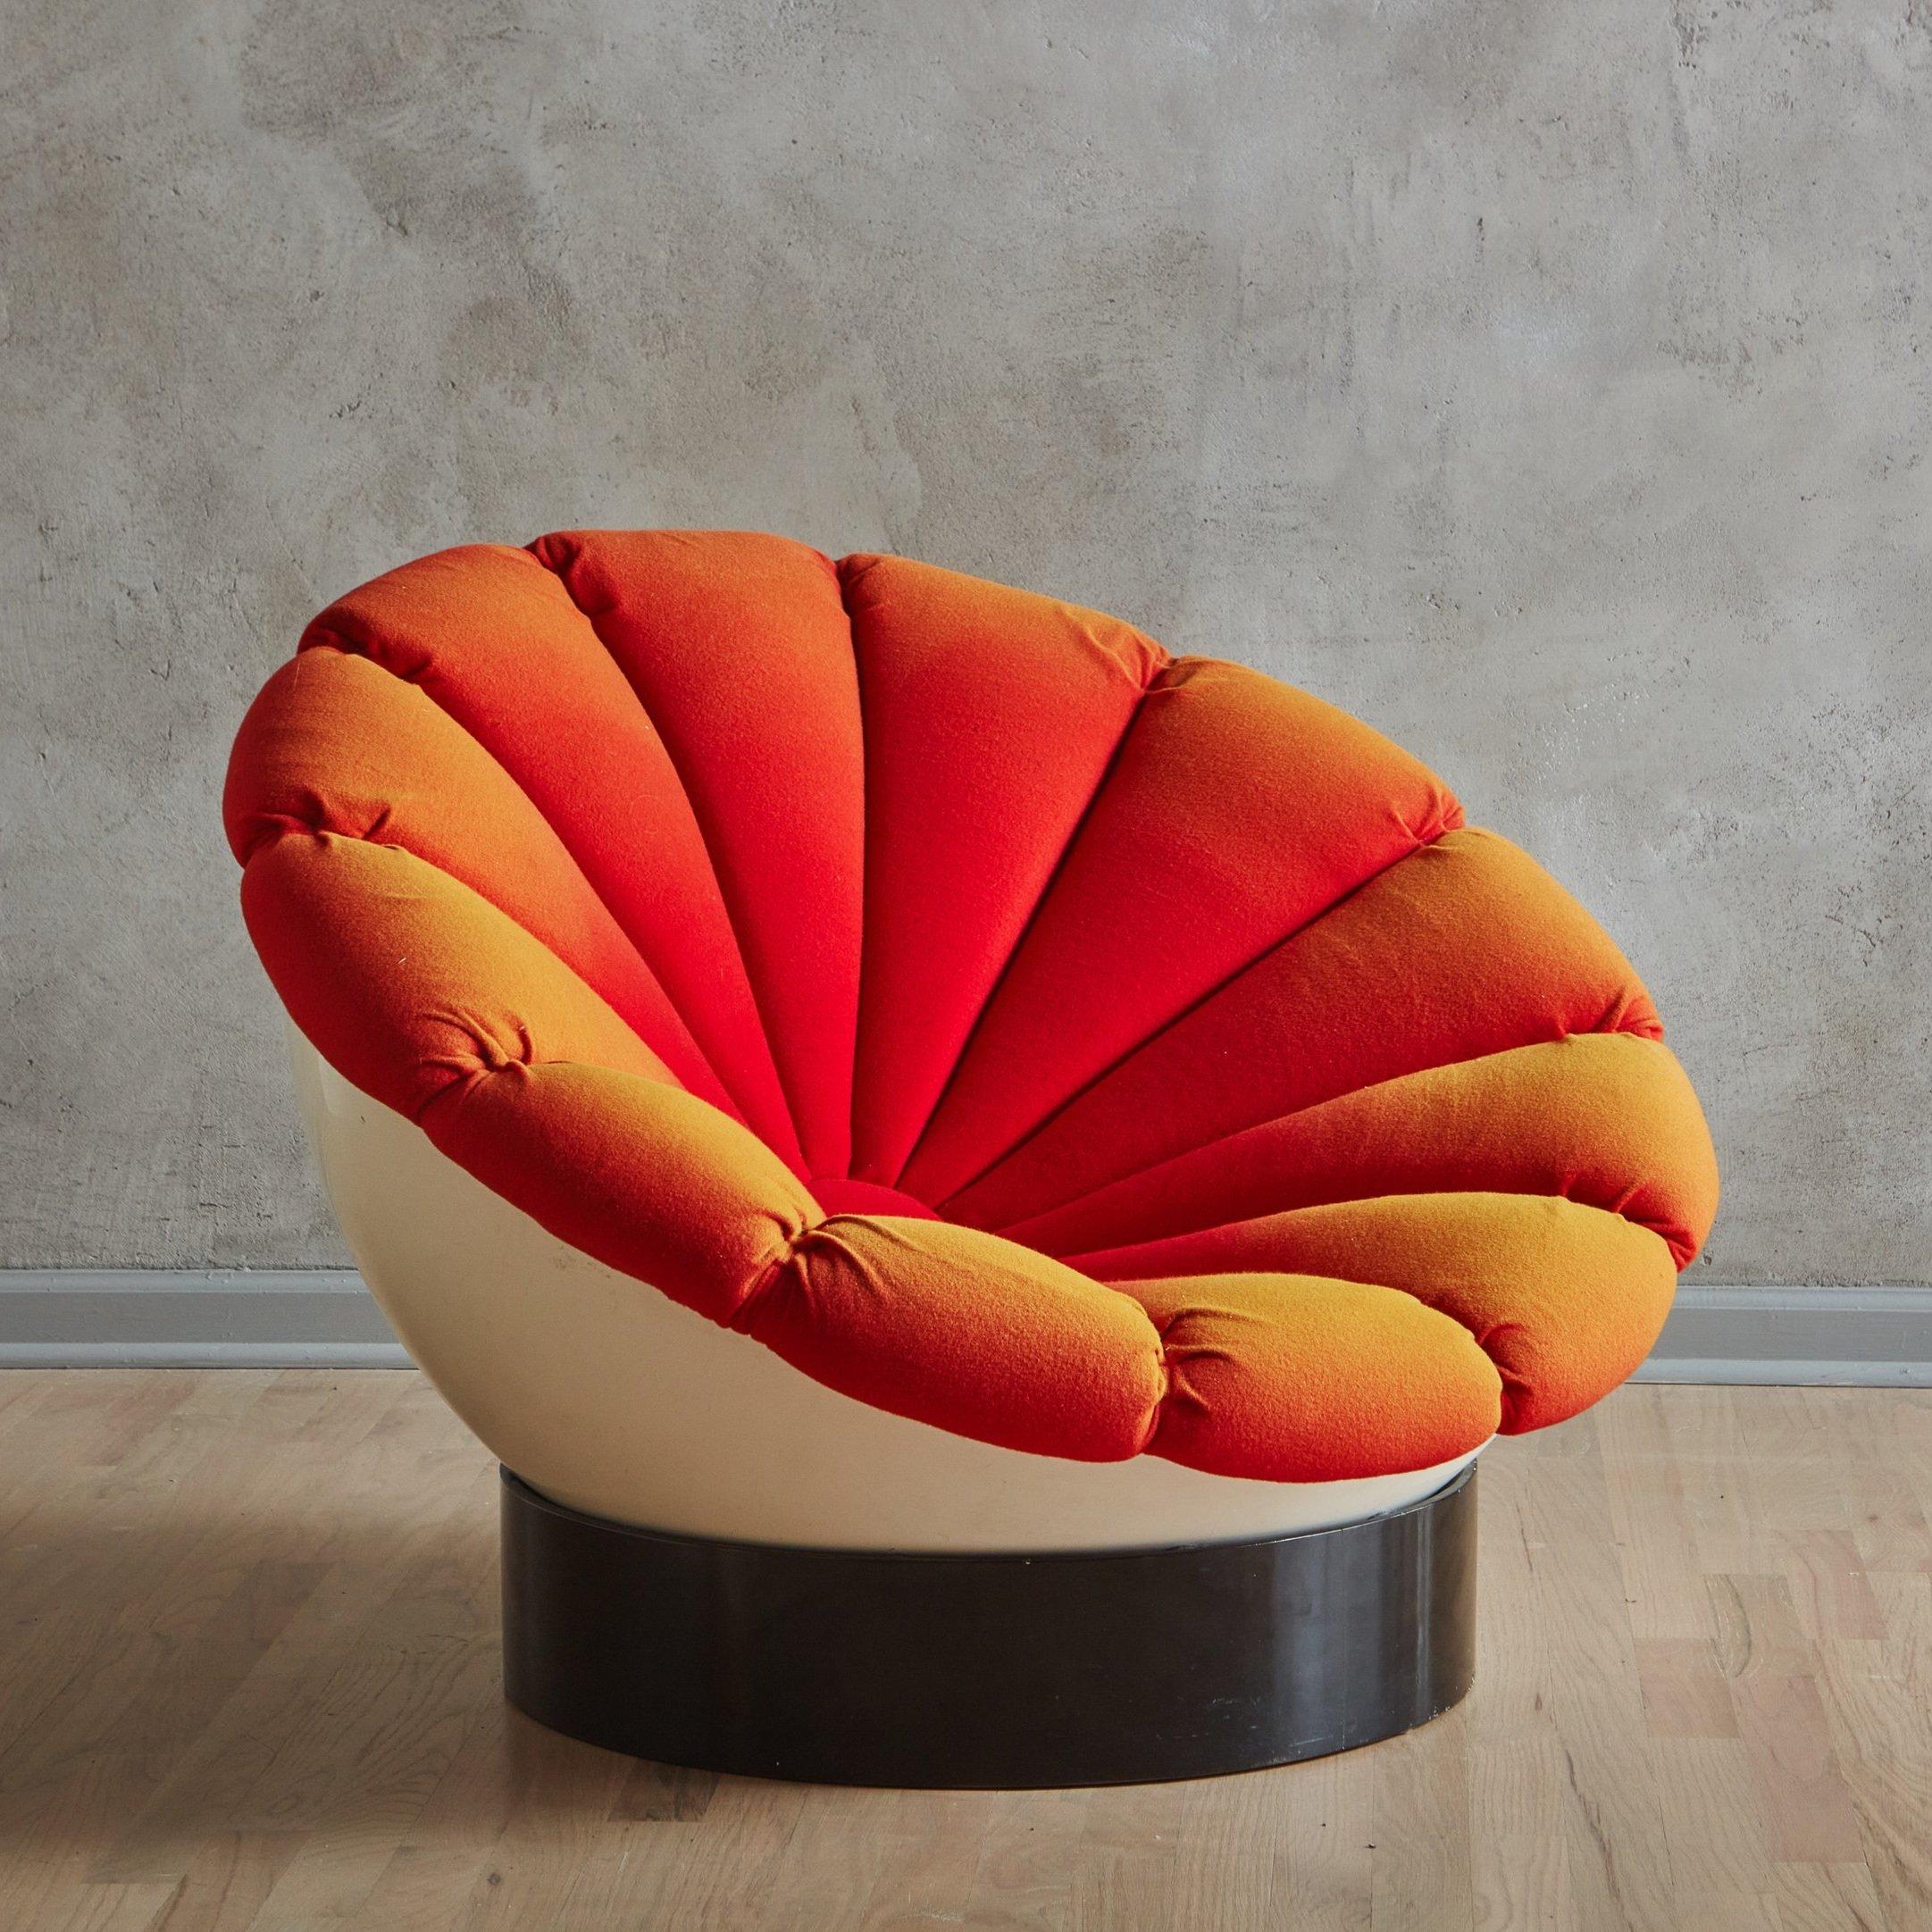 Space Age Fiberglass ‘Girasole’ Chair with Pillow by Luciano Frigerio, Italy 1960s For Sale